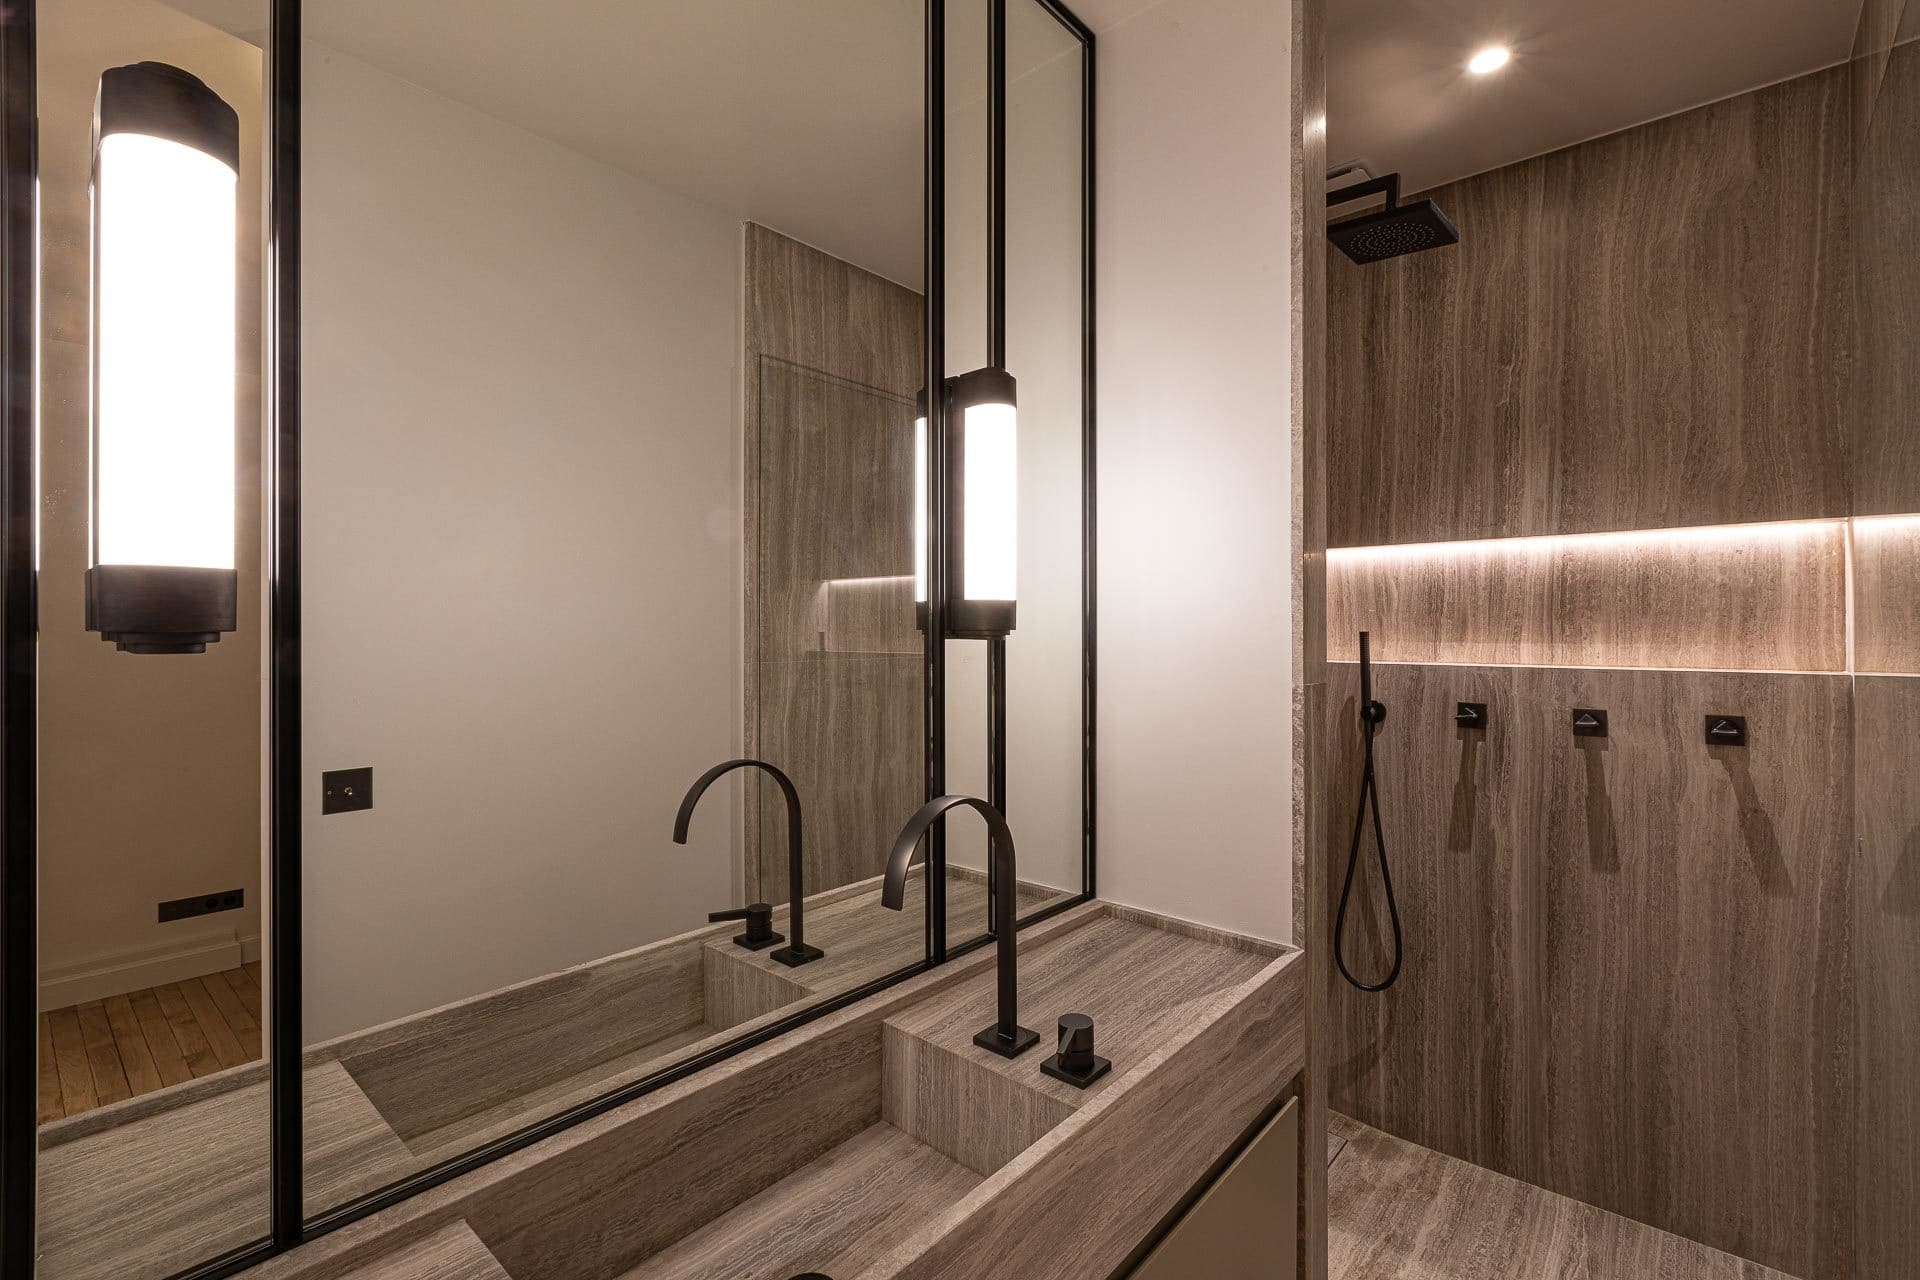 Design of the atmosphere of a luxury bathroom